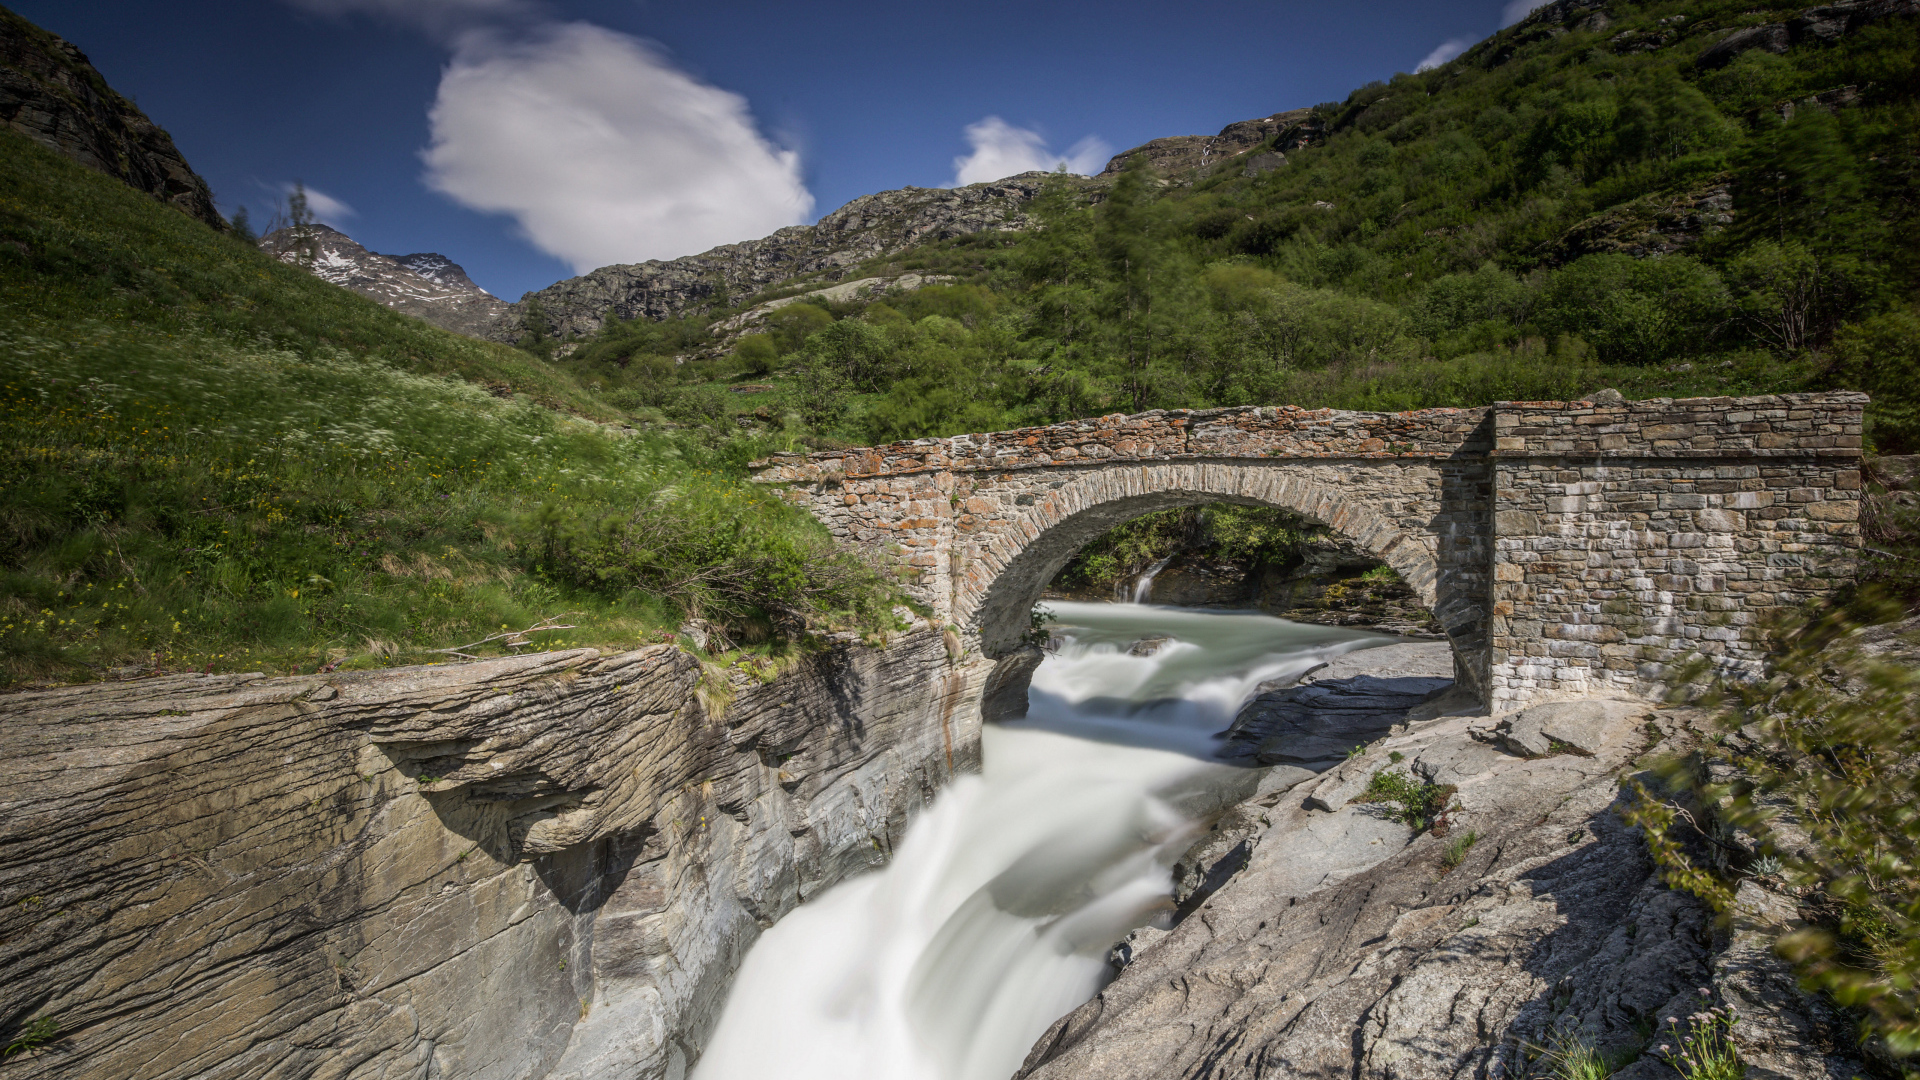 Stone bridge over the river in the mountains